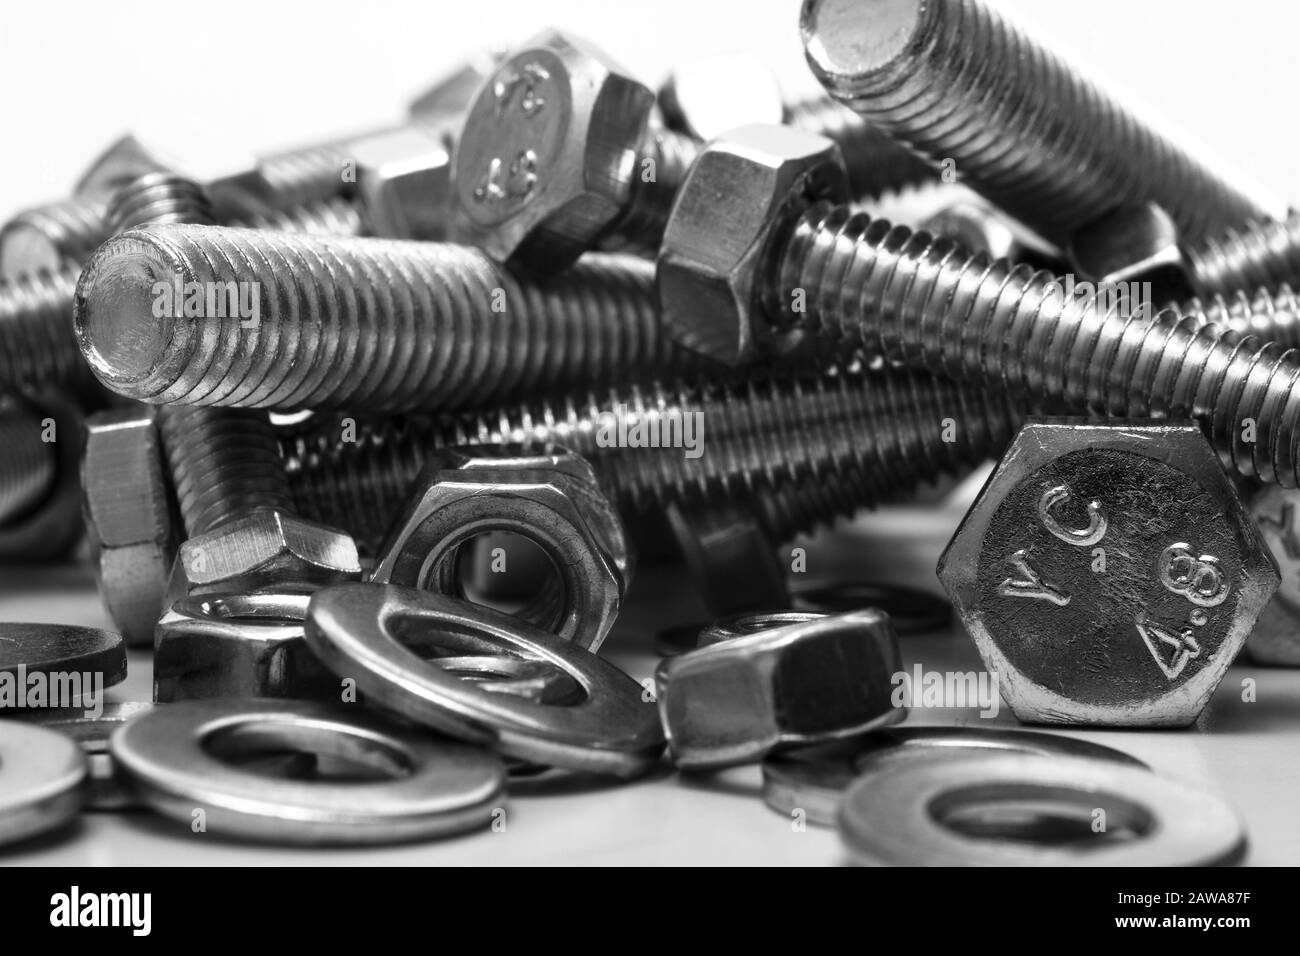 Steel bolts nuts and washers isolated on a white background Stock Photo